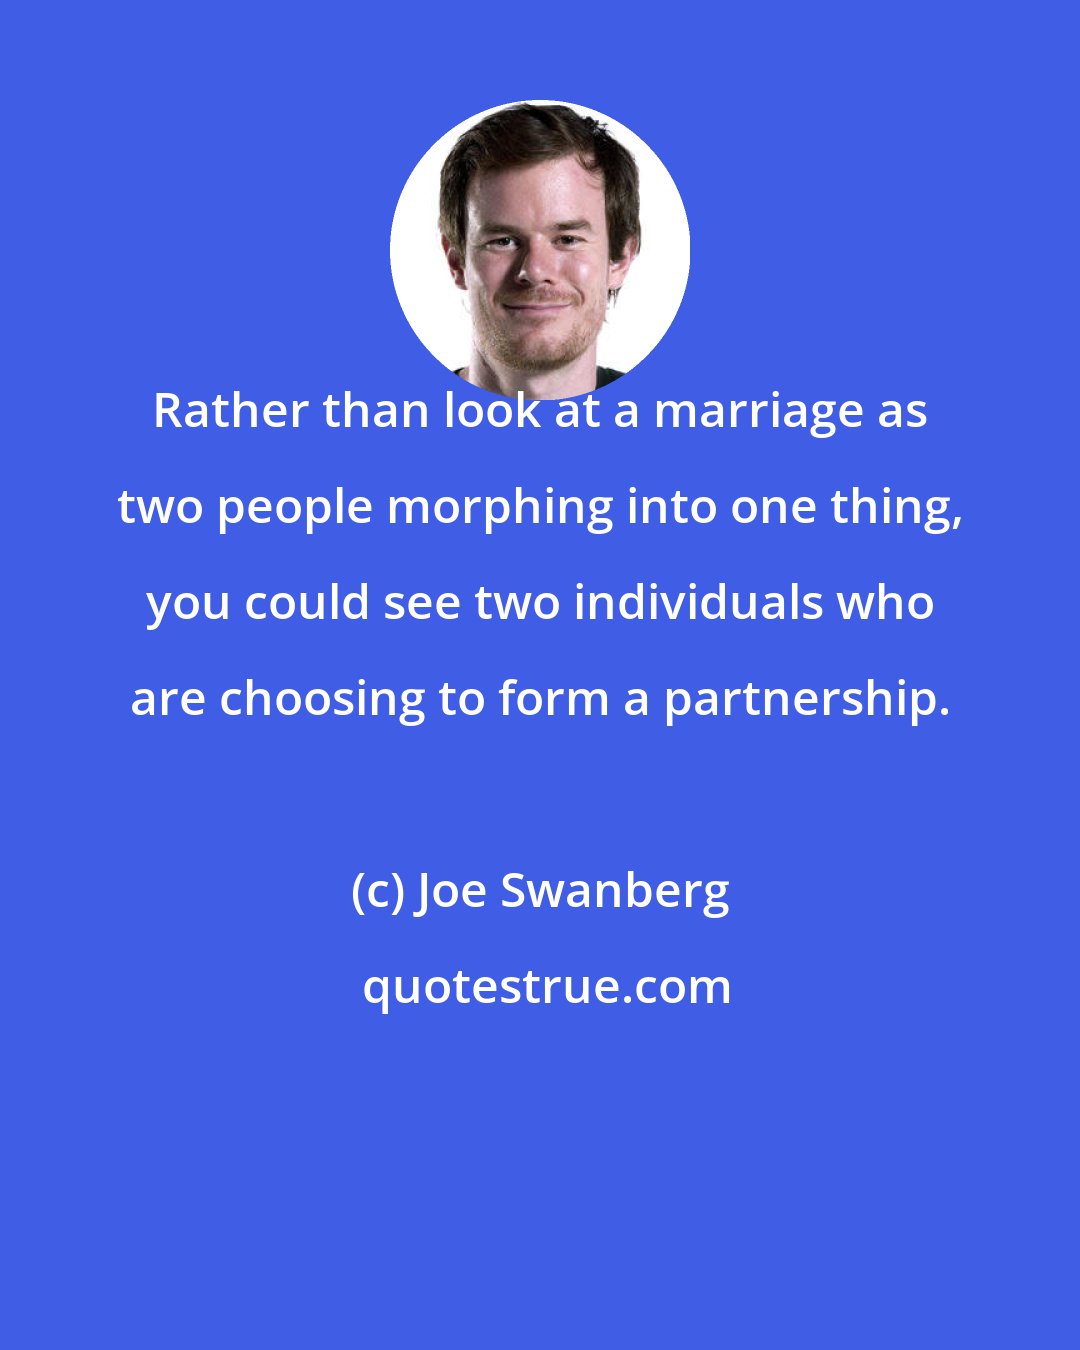 Joe Swanberg: Rather than look at a marriage as two people morphing into one thing, you could see two individuals who are choosing to form a partnership.